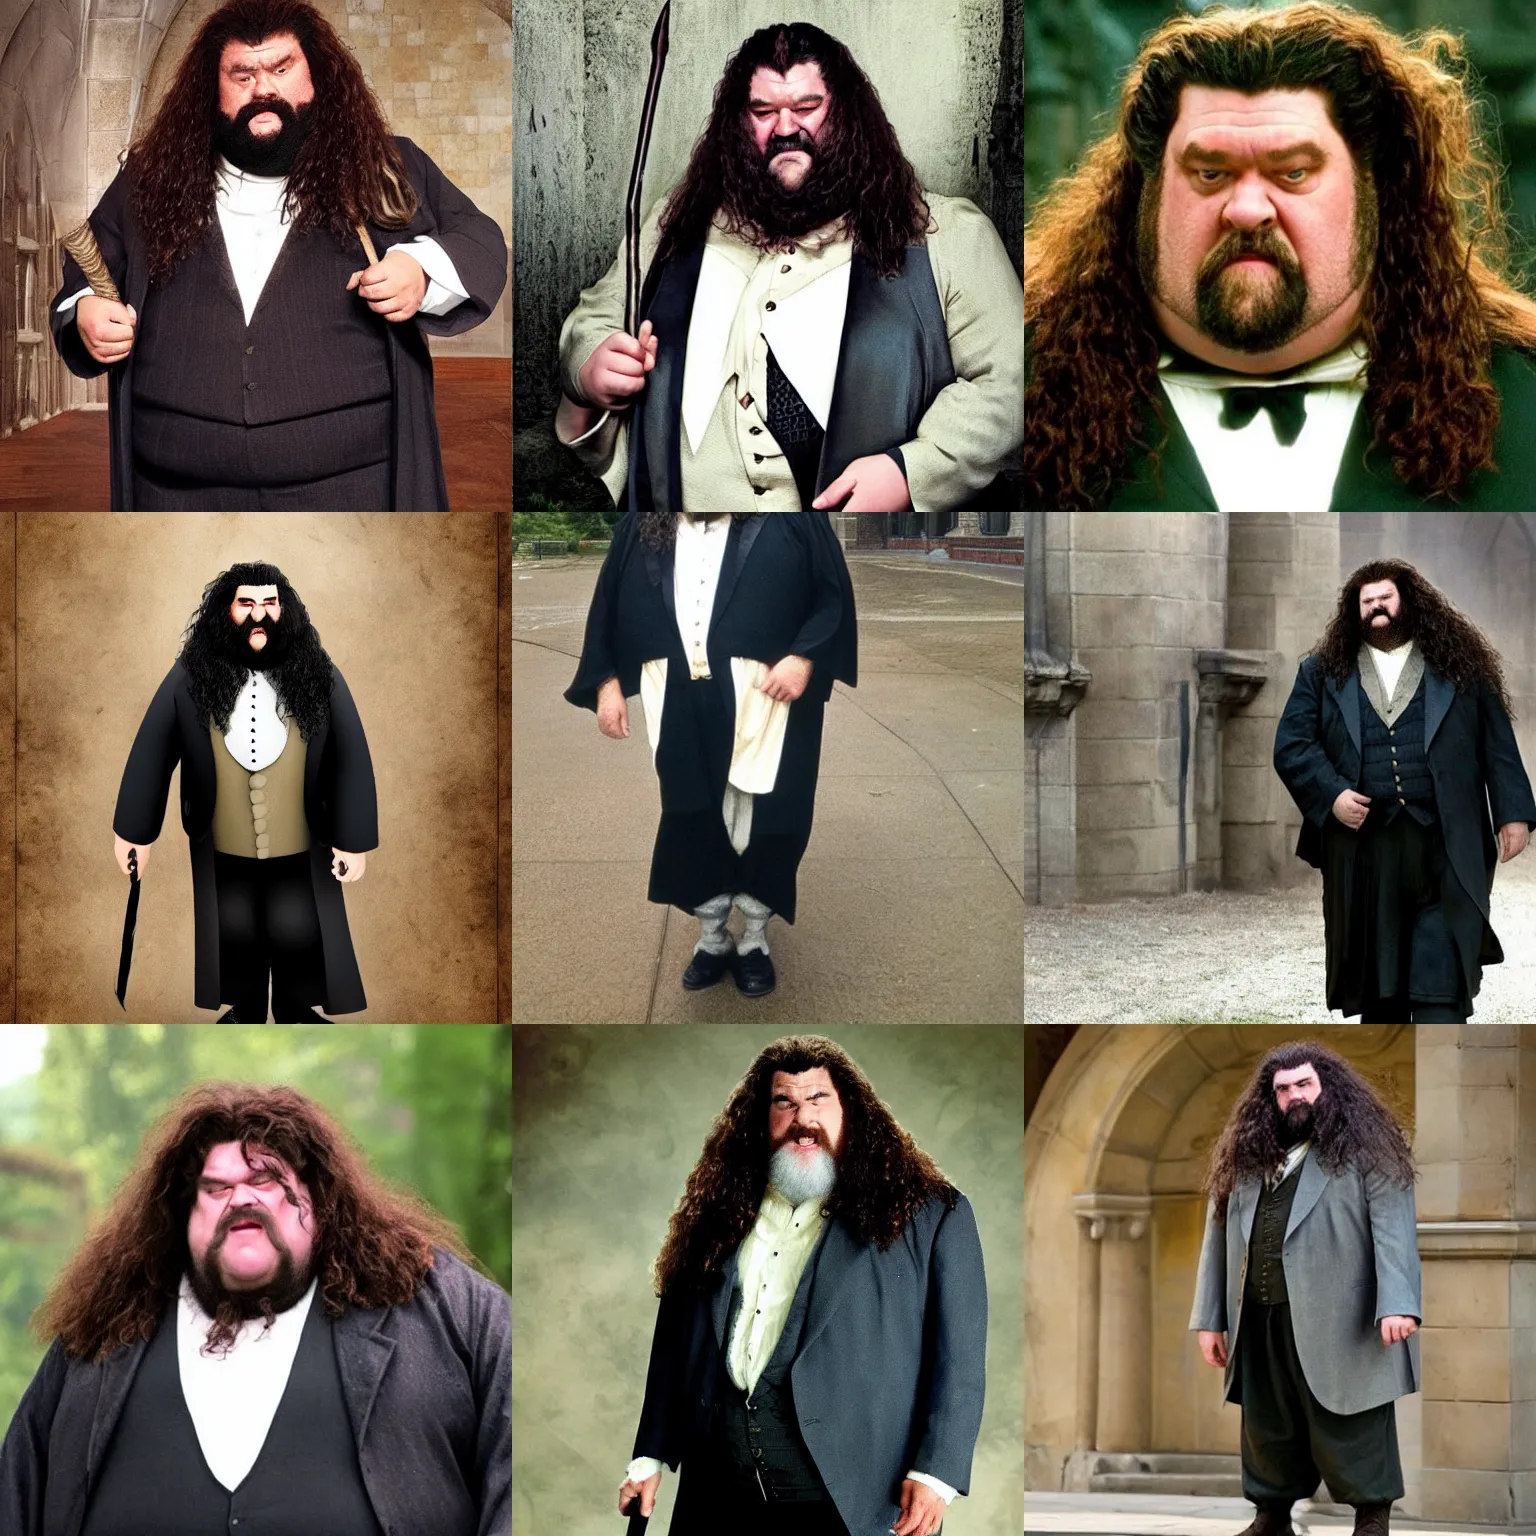 Prompt: hagrid from the harry potter movies, in a tuxedo